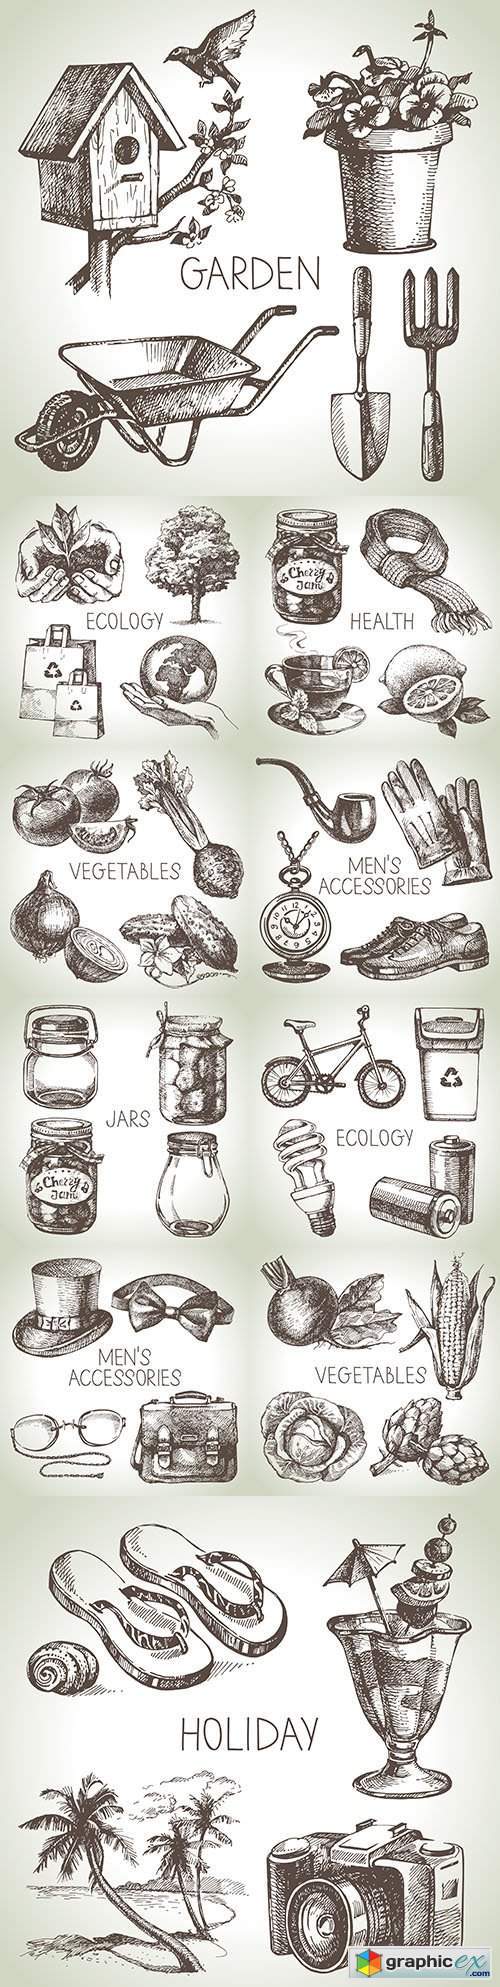 Sketch various accessories and objects design illustration